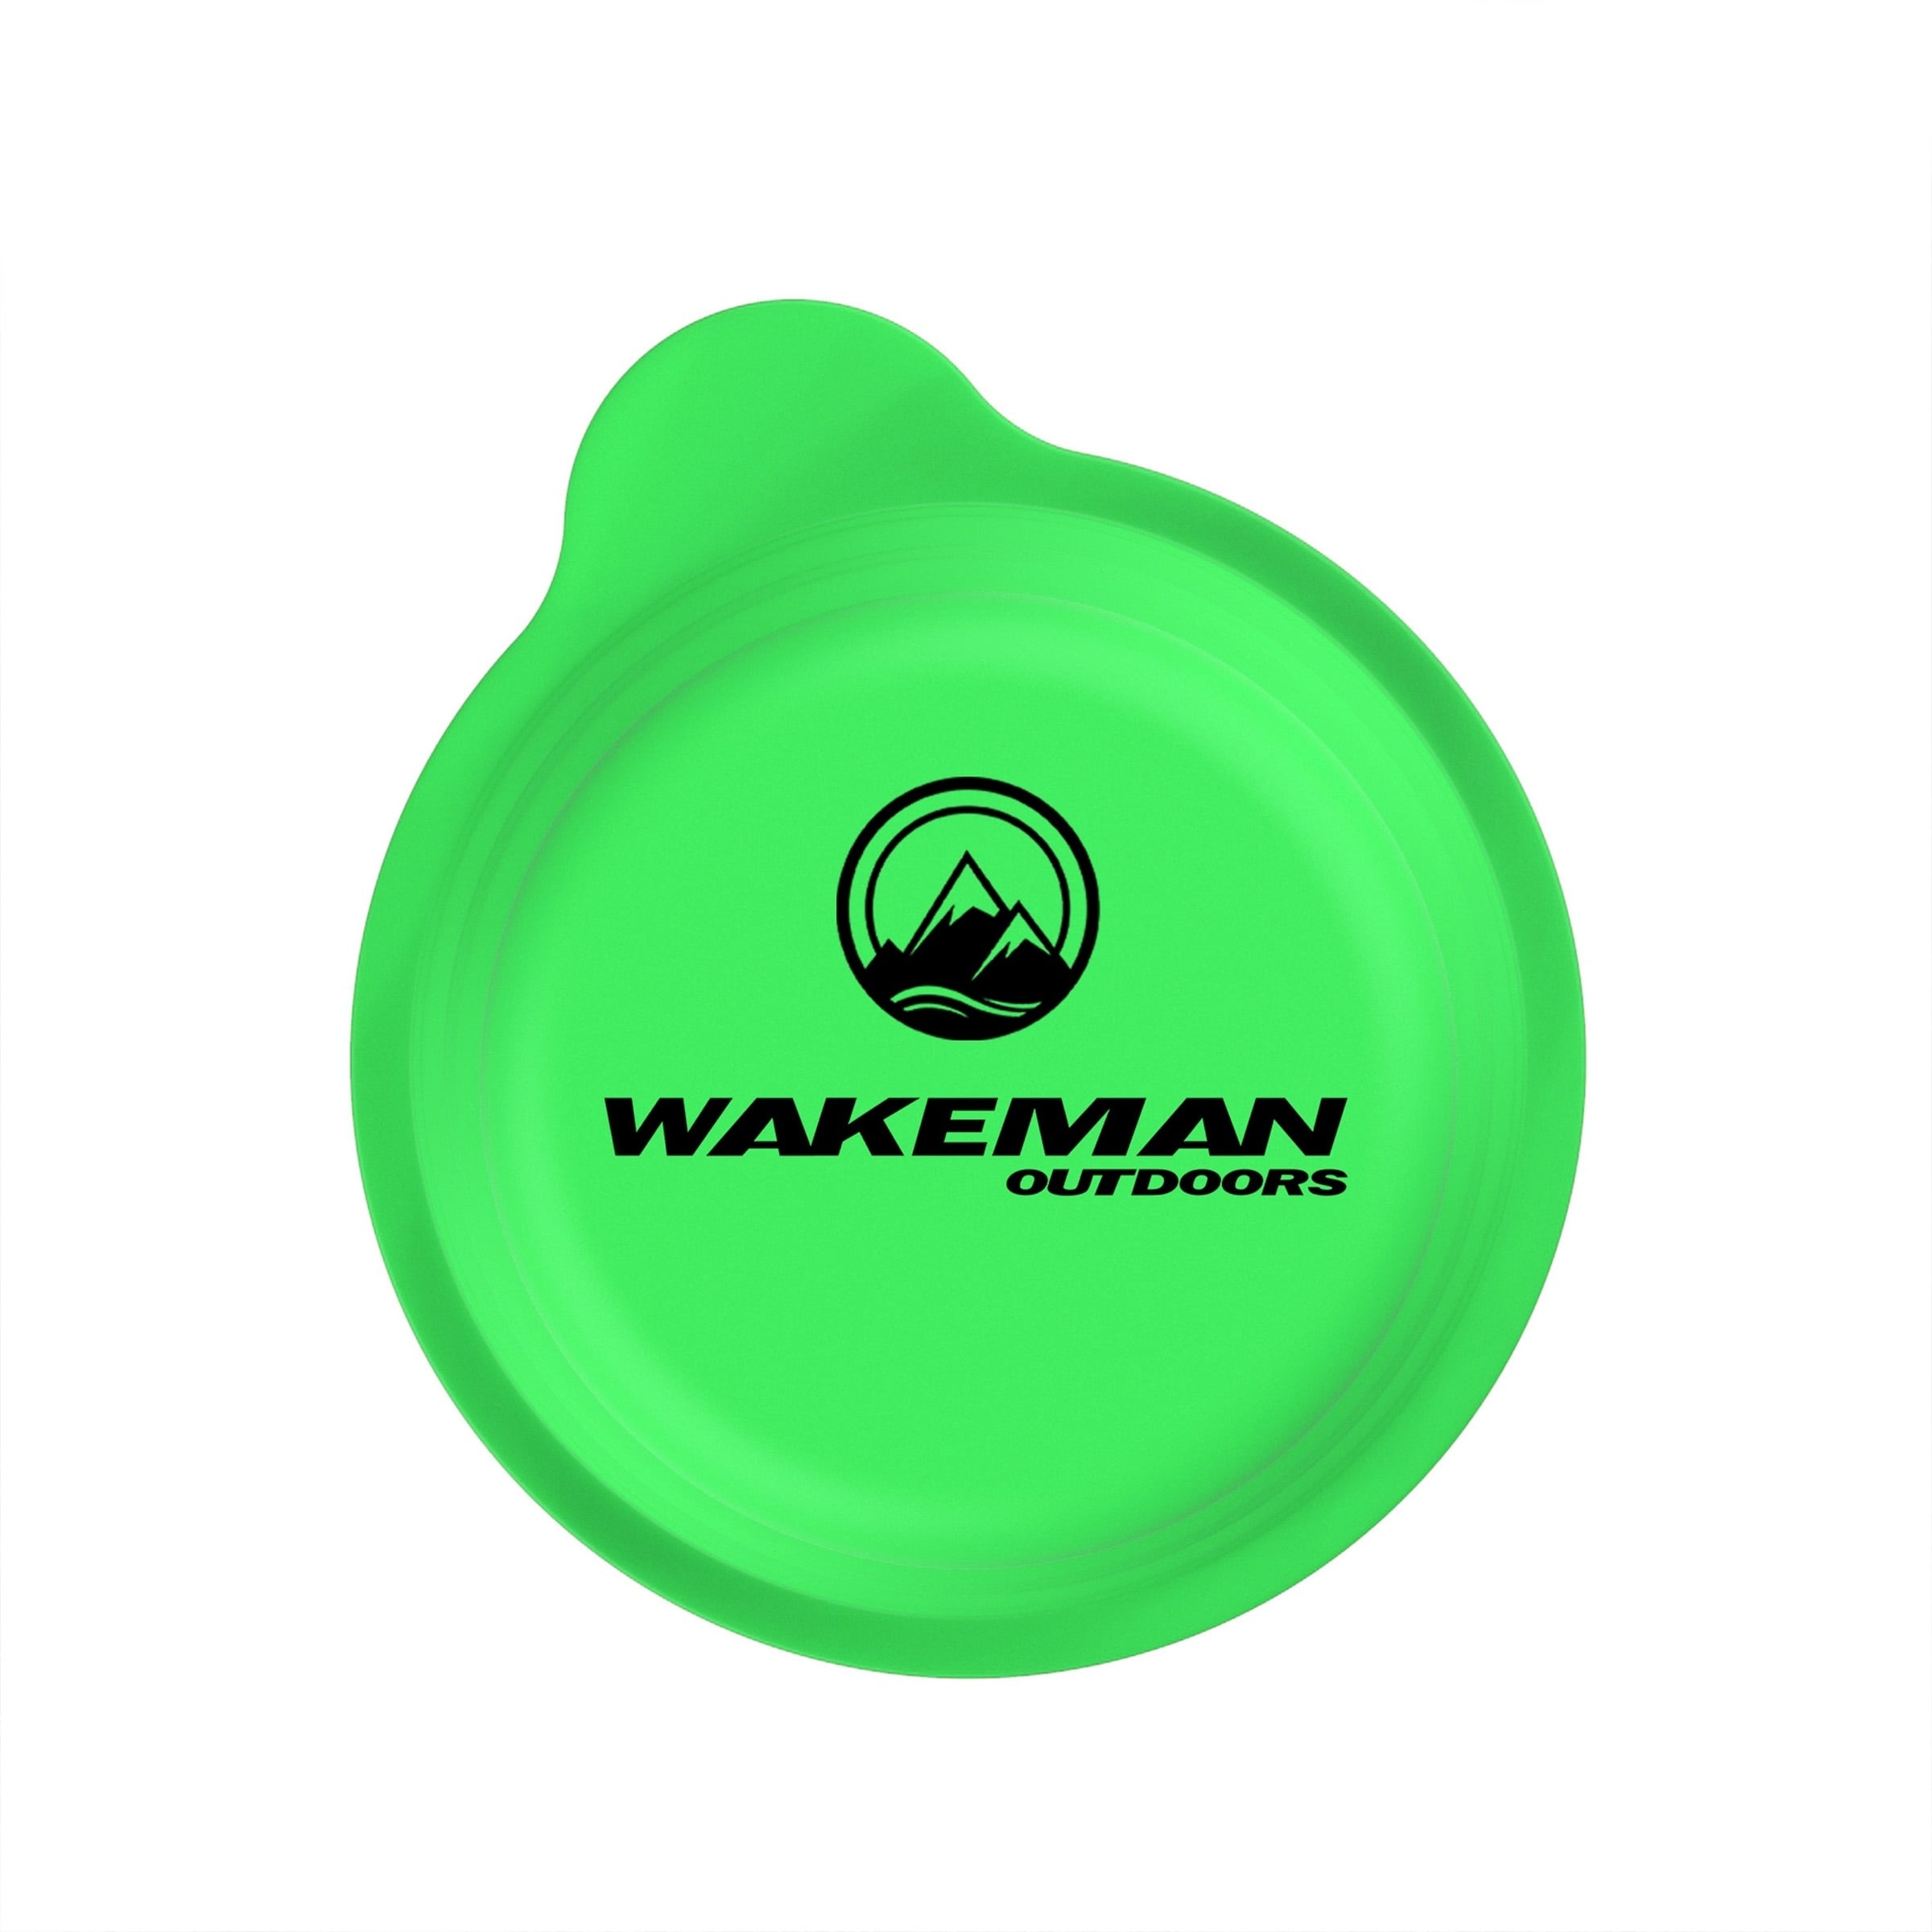 Collapsible Bowls with Lids- BPA Free Silicone, Reusable Hot or Cold Food  Bowl for Camping, Travel, Hiking, More by Wakeman Outdoors (2 Pack, Red) 